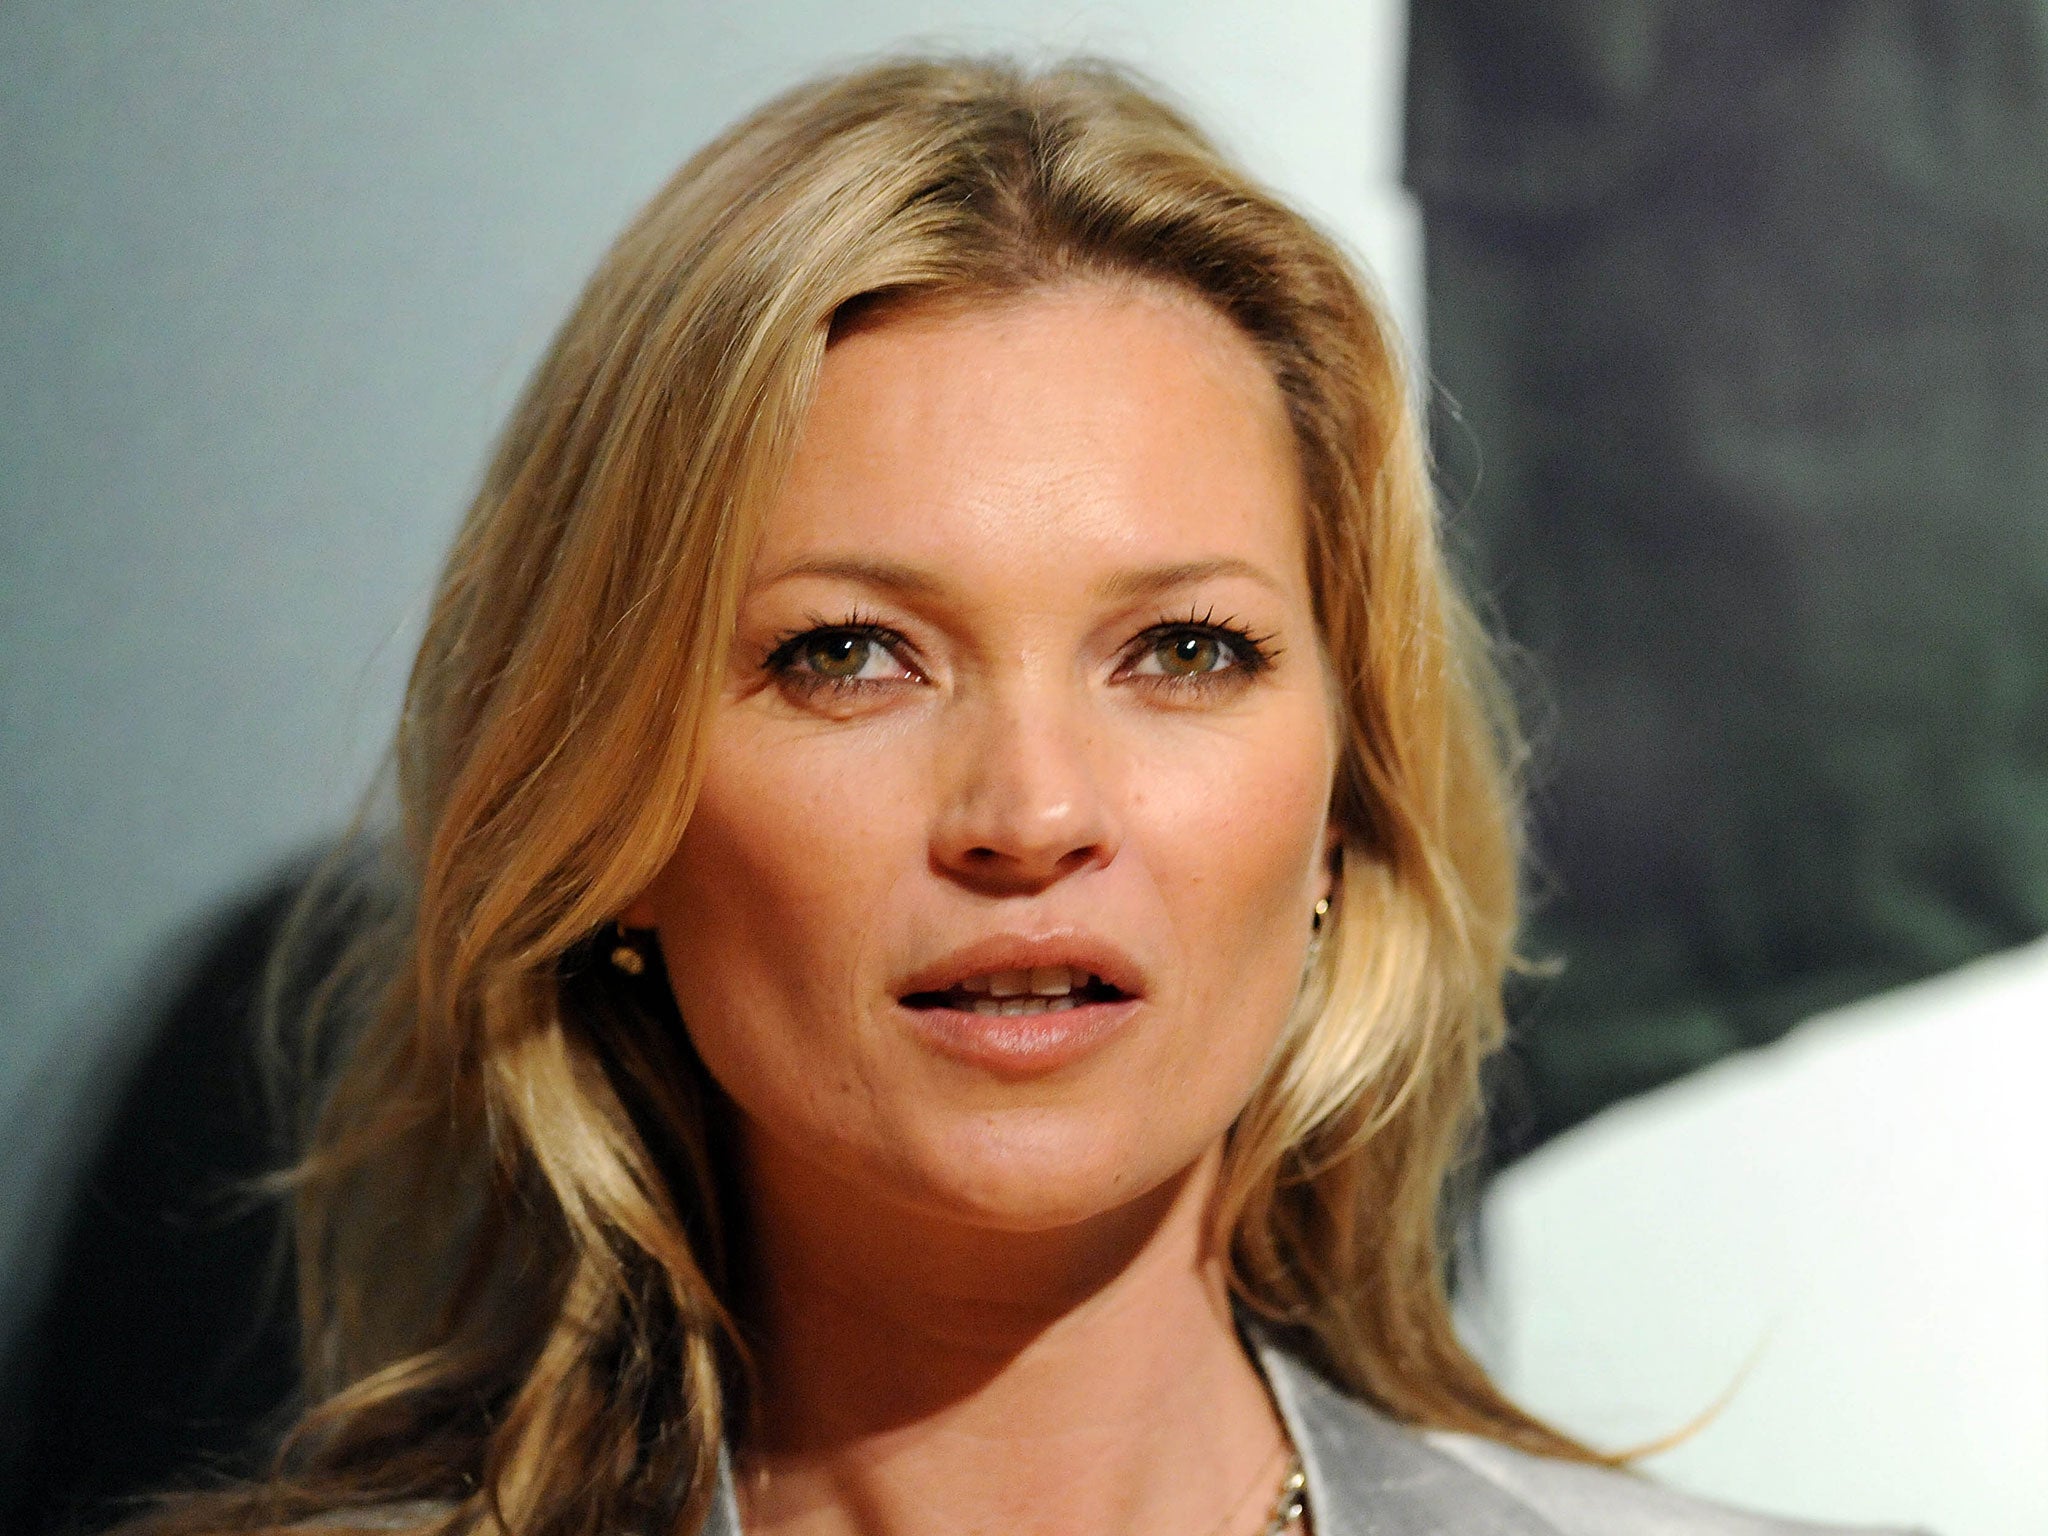 Kate Moss apparently insulted the pilot as she was escorted from the plane